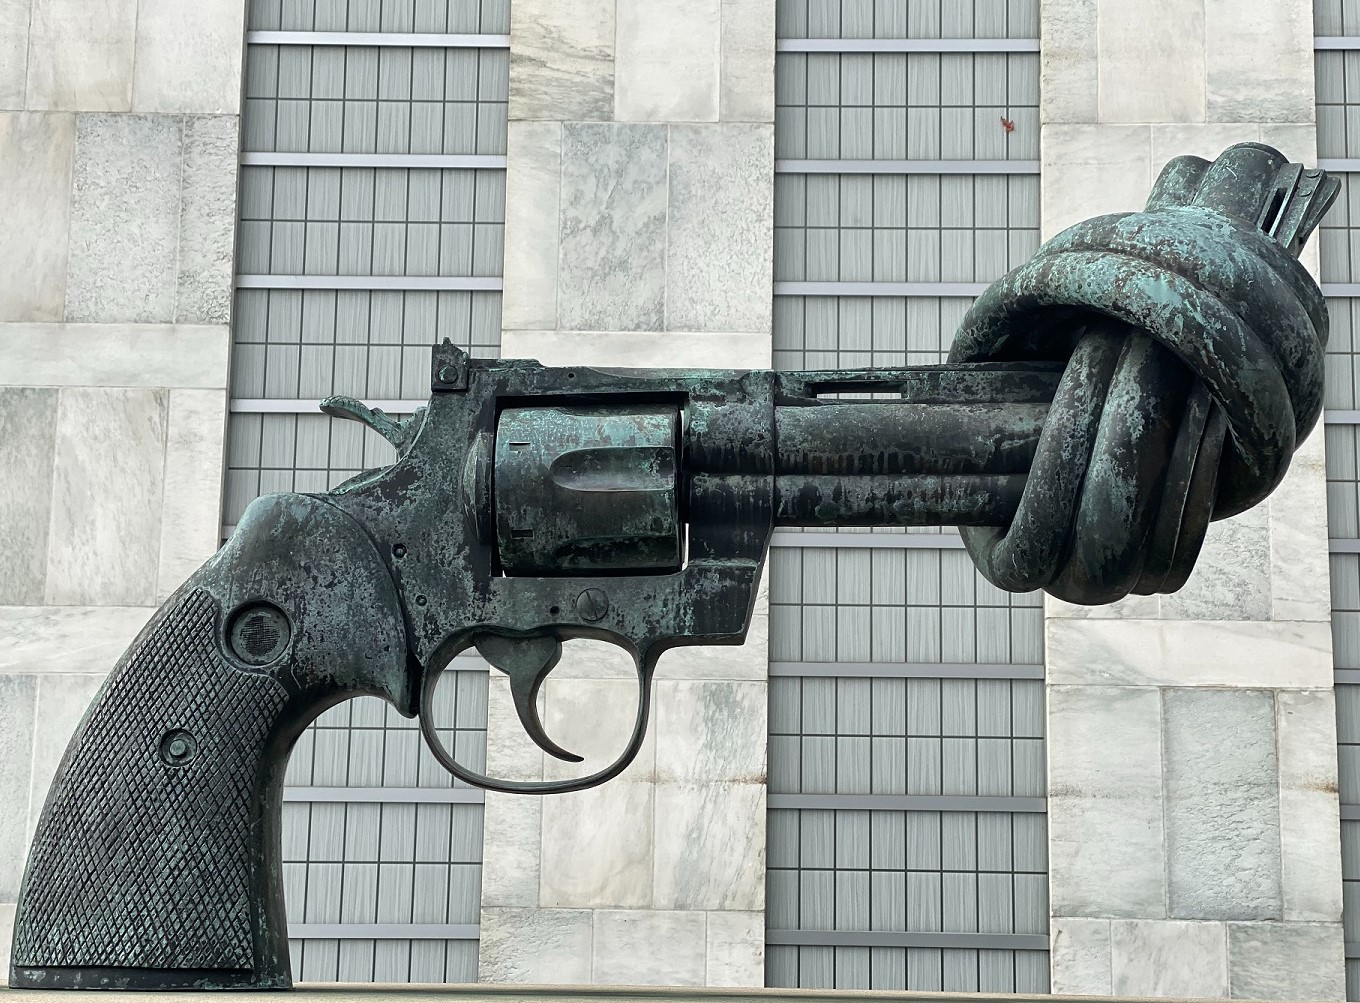 Photo:  sculpture of a hand gun with the barrel tied in a knot.  Photo by Maria Lysenko on Unsplash.com.